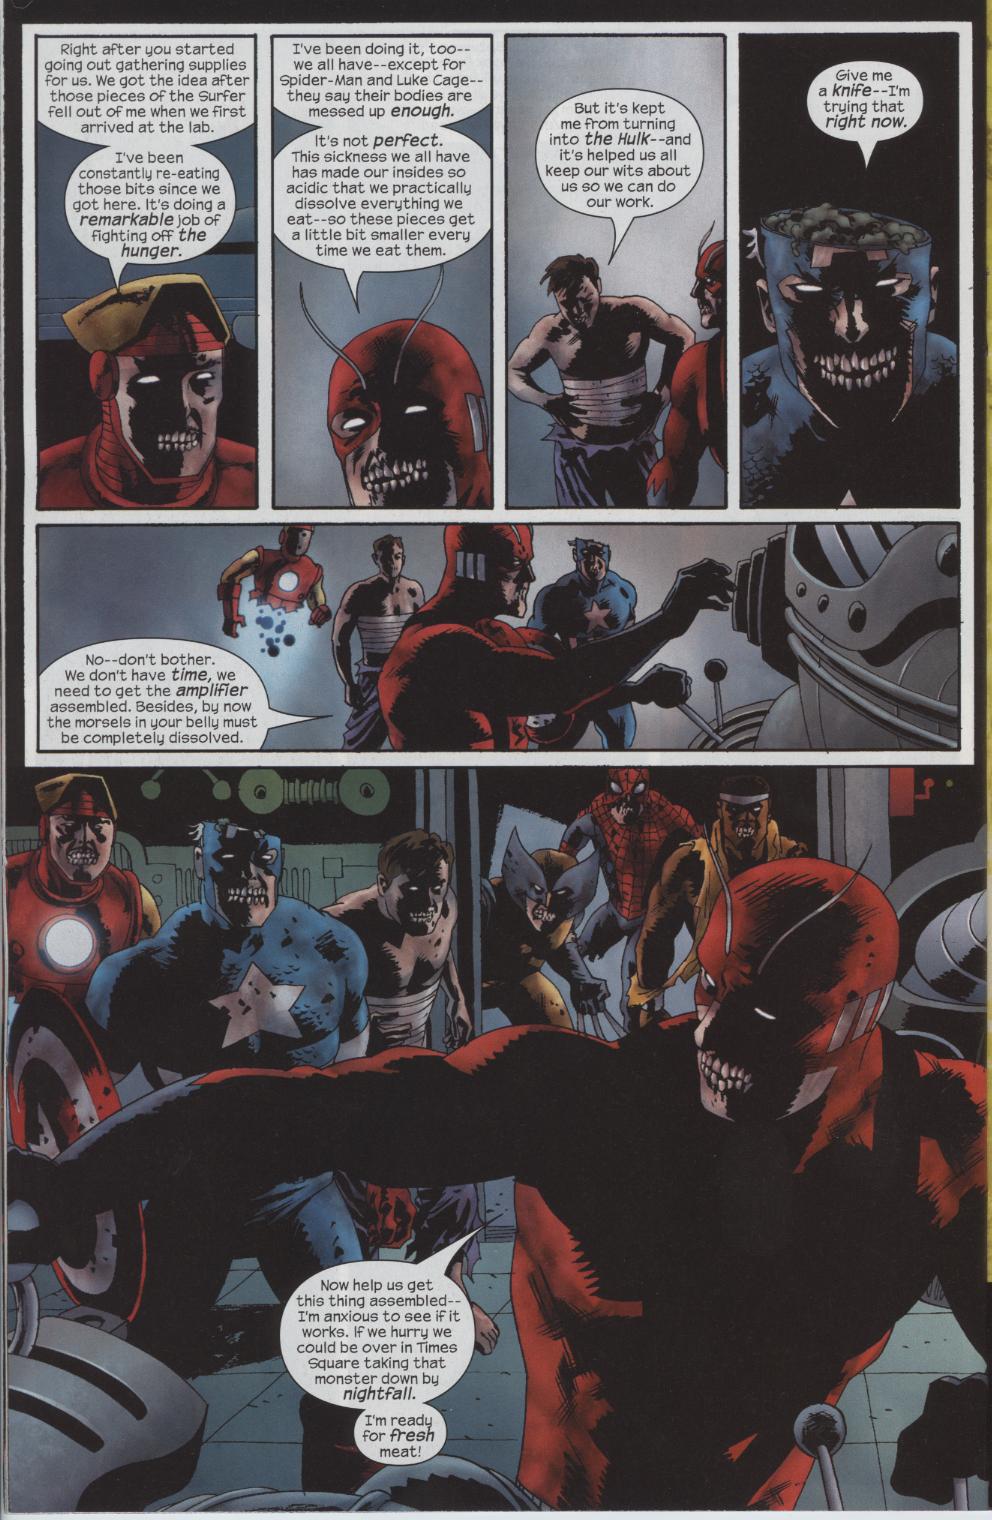 Marvel Zombies 1. Part 3 of 5